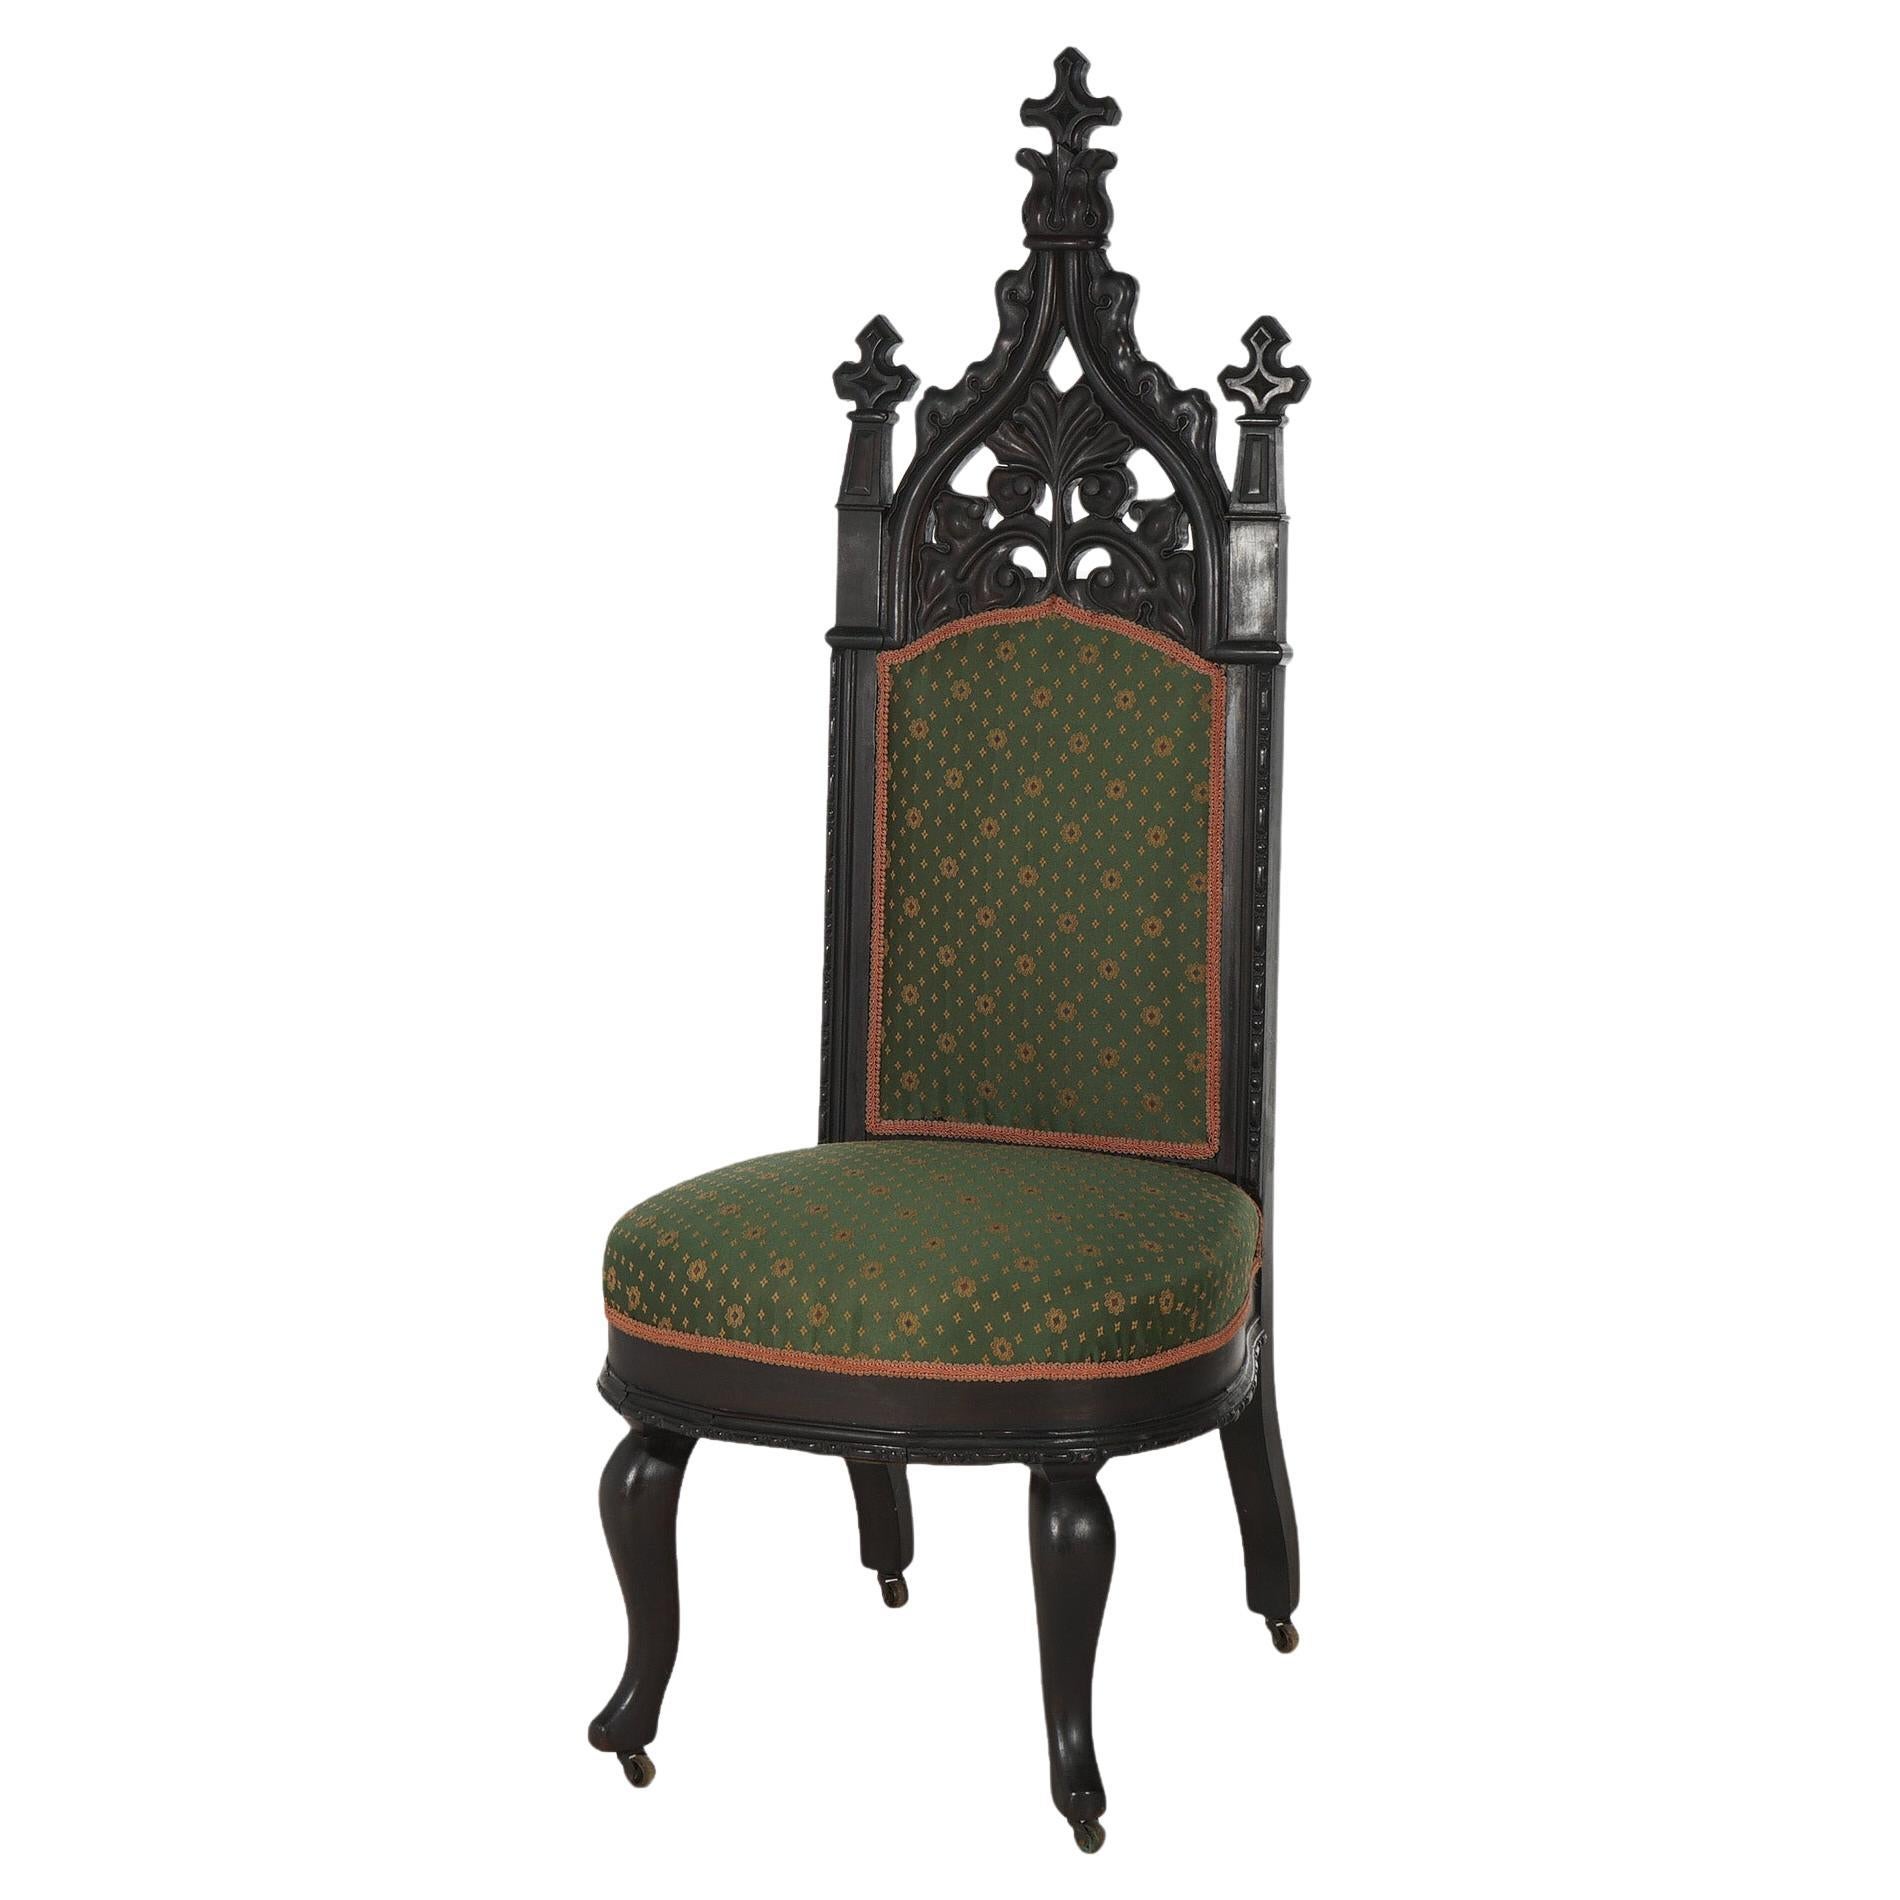 Antique Gothic Revival Ebonized & Carved Walnut Upholstered Throne Chair C1860 For Sale